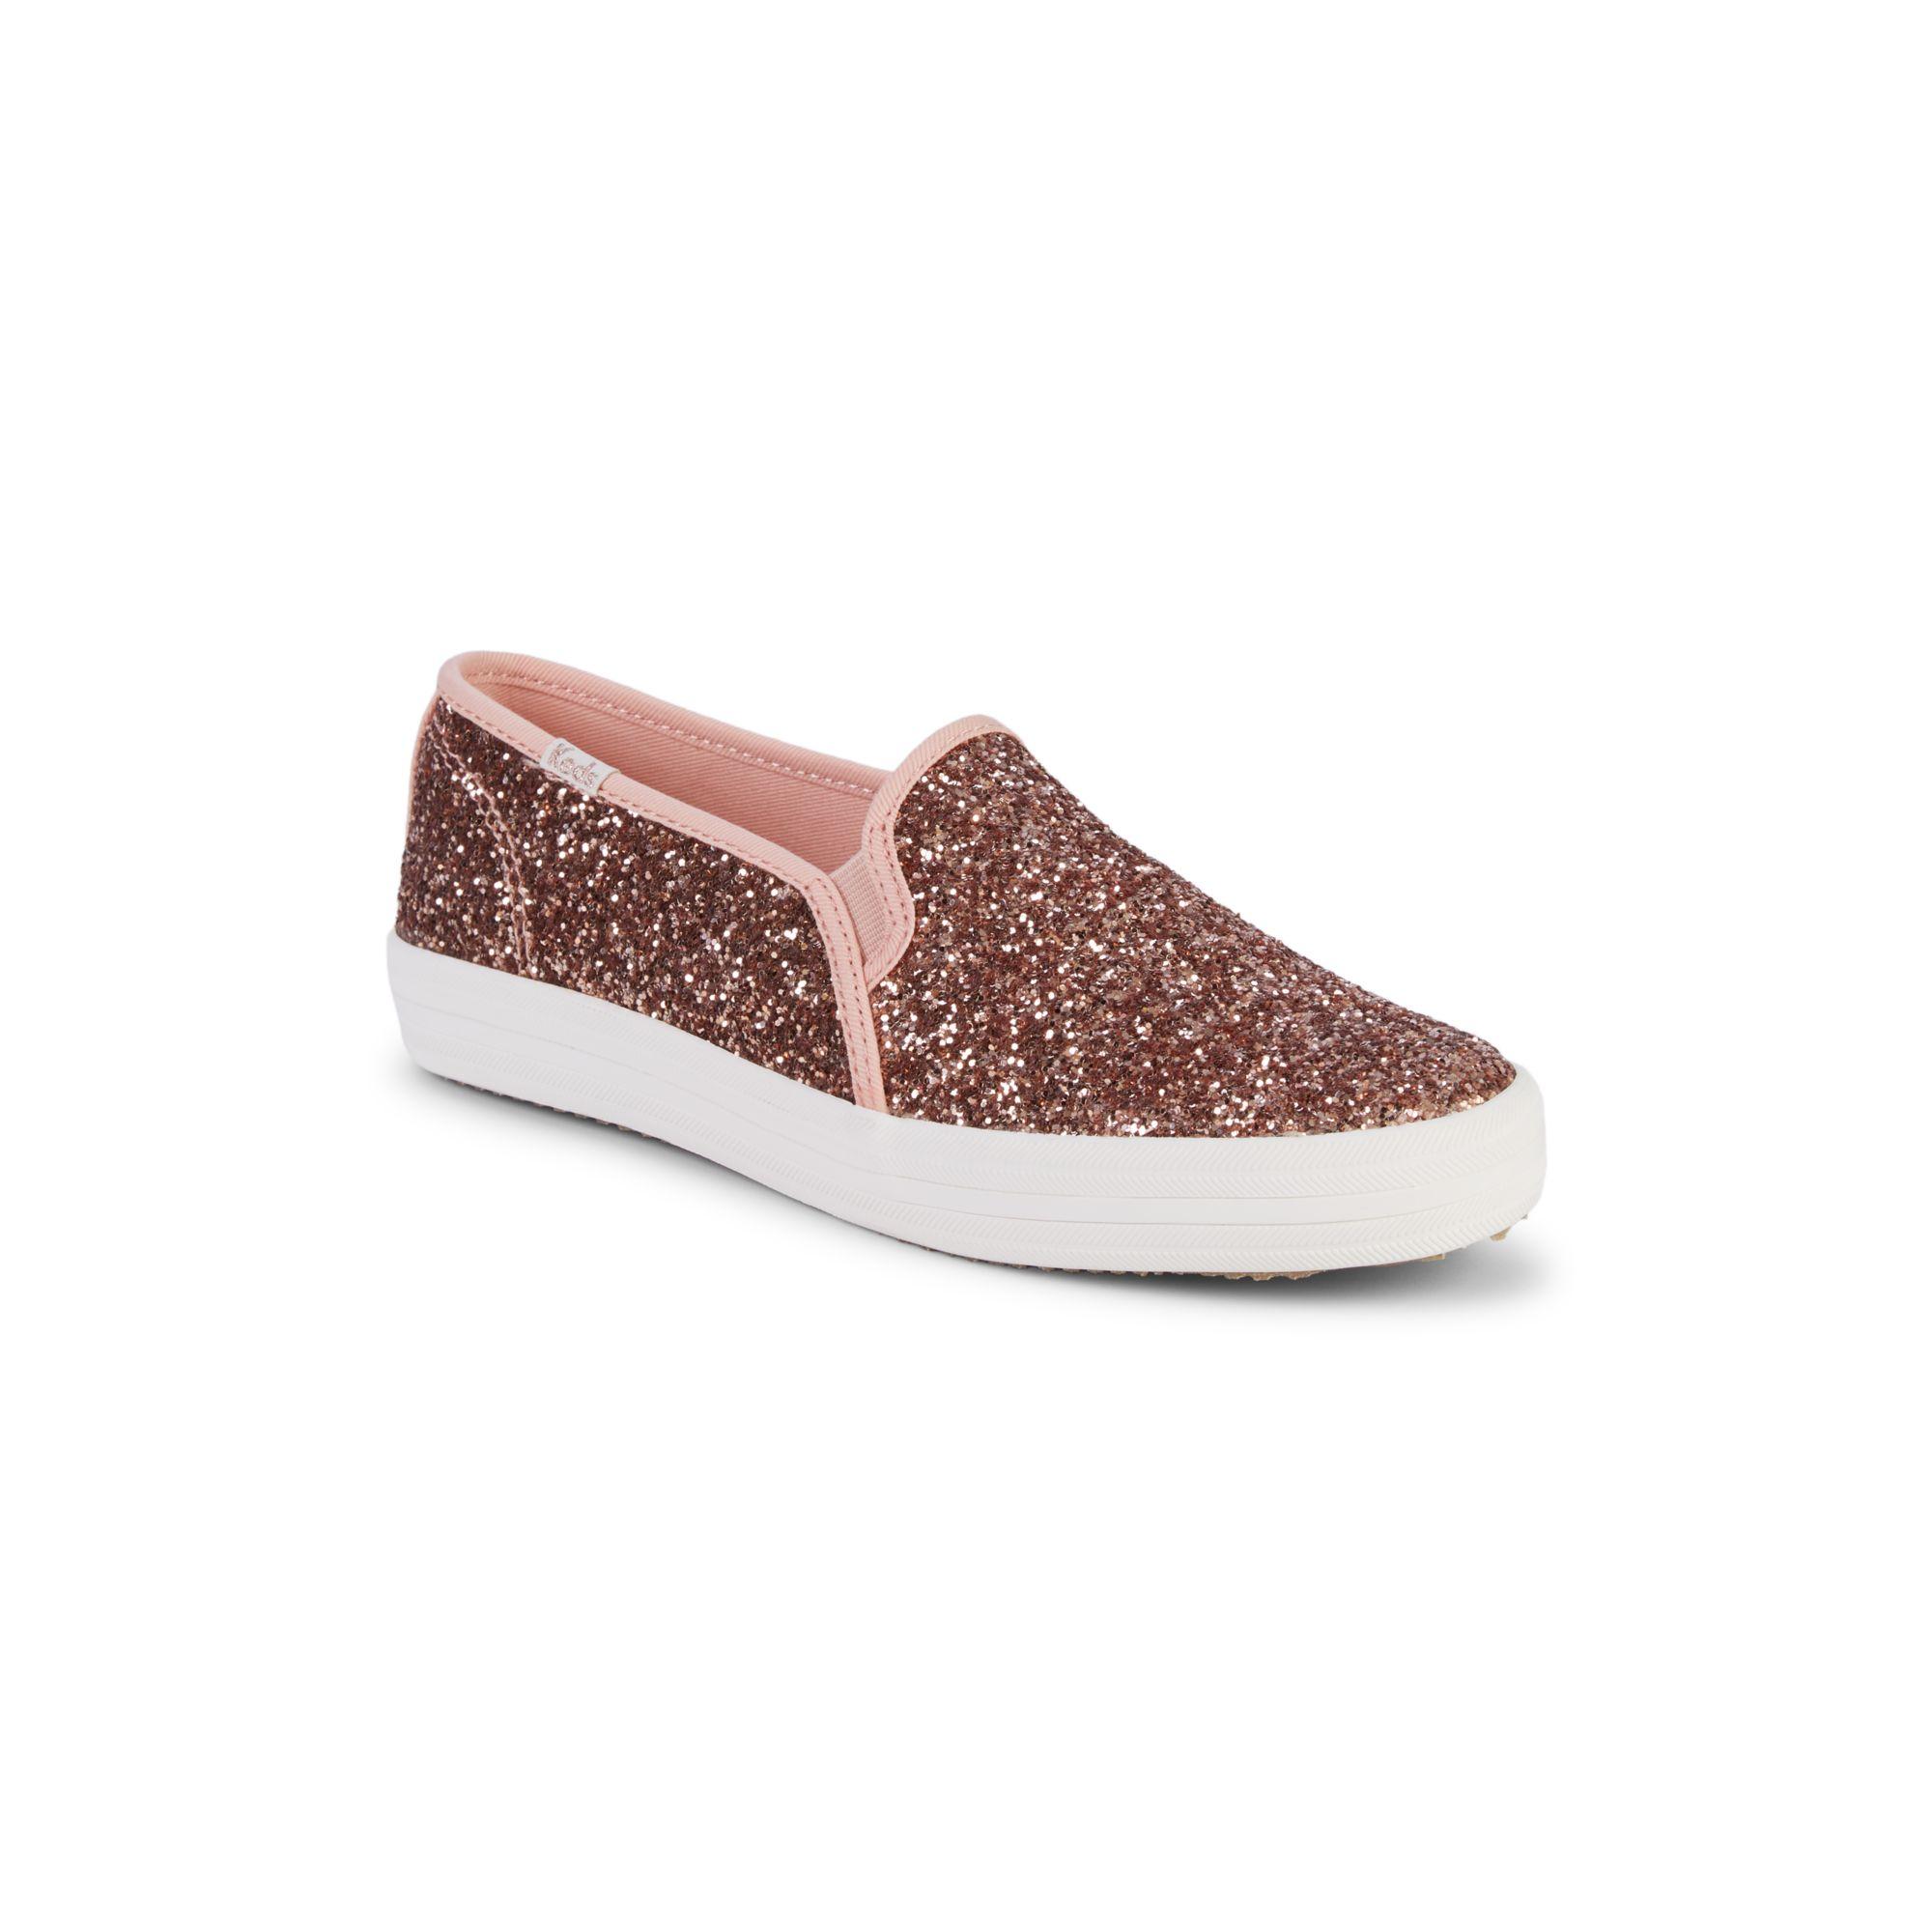 Keds Synthetic Double Decker Slip-on Sneakers in Pink - Lyst